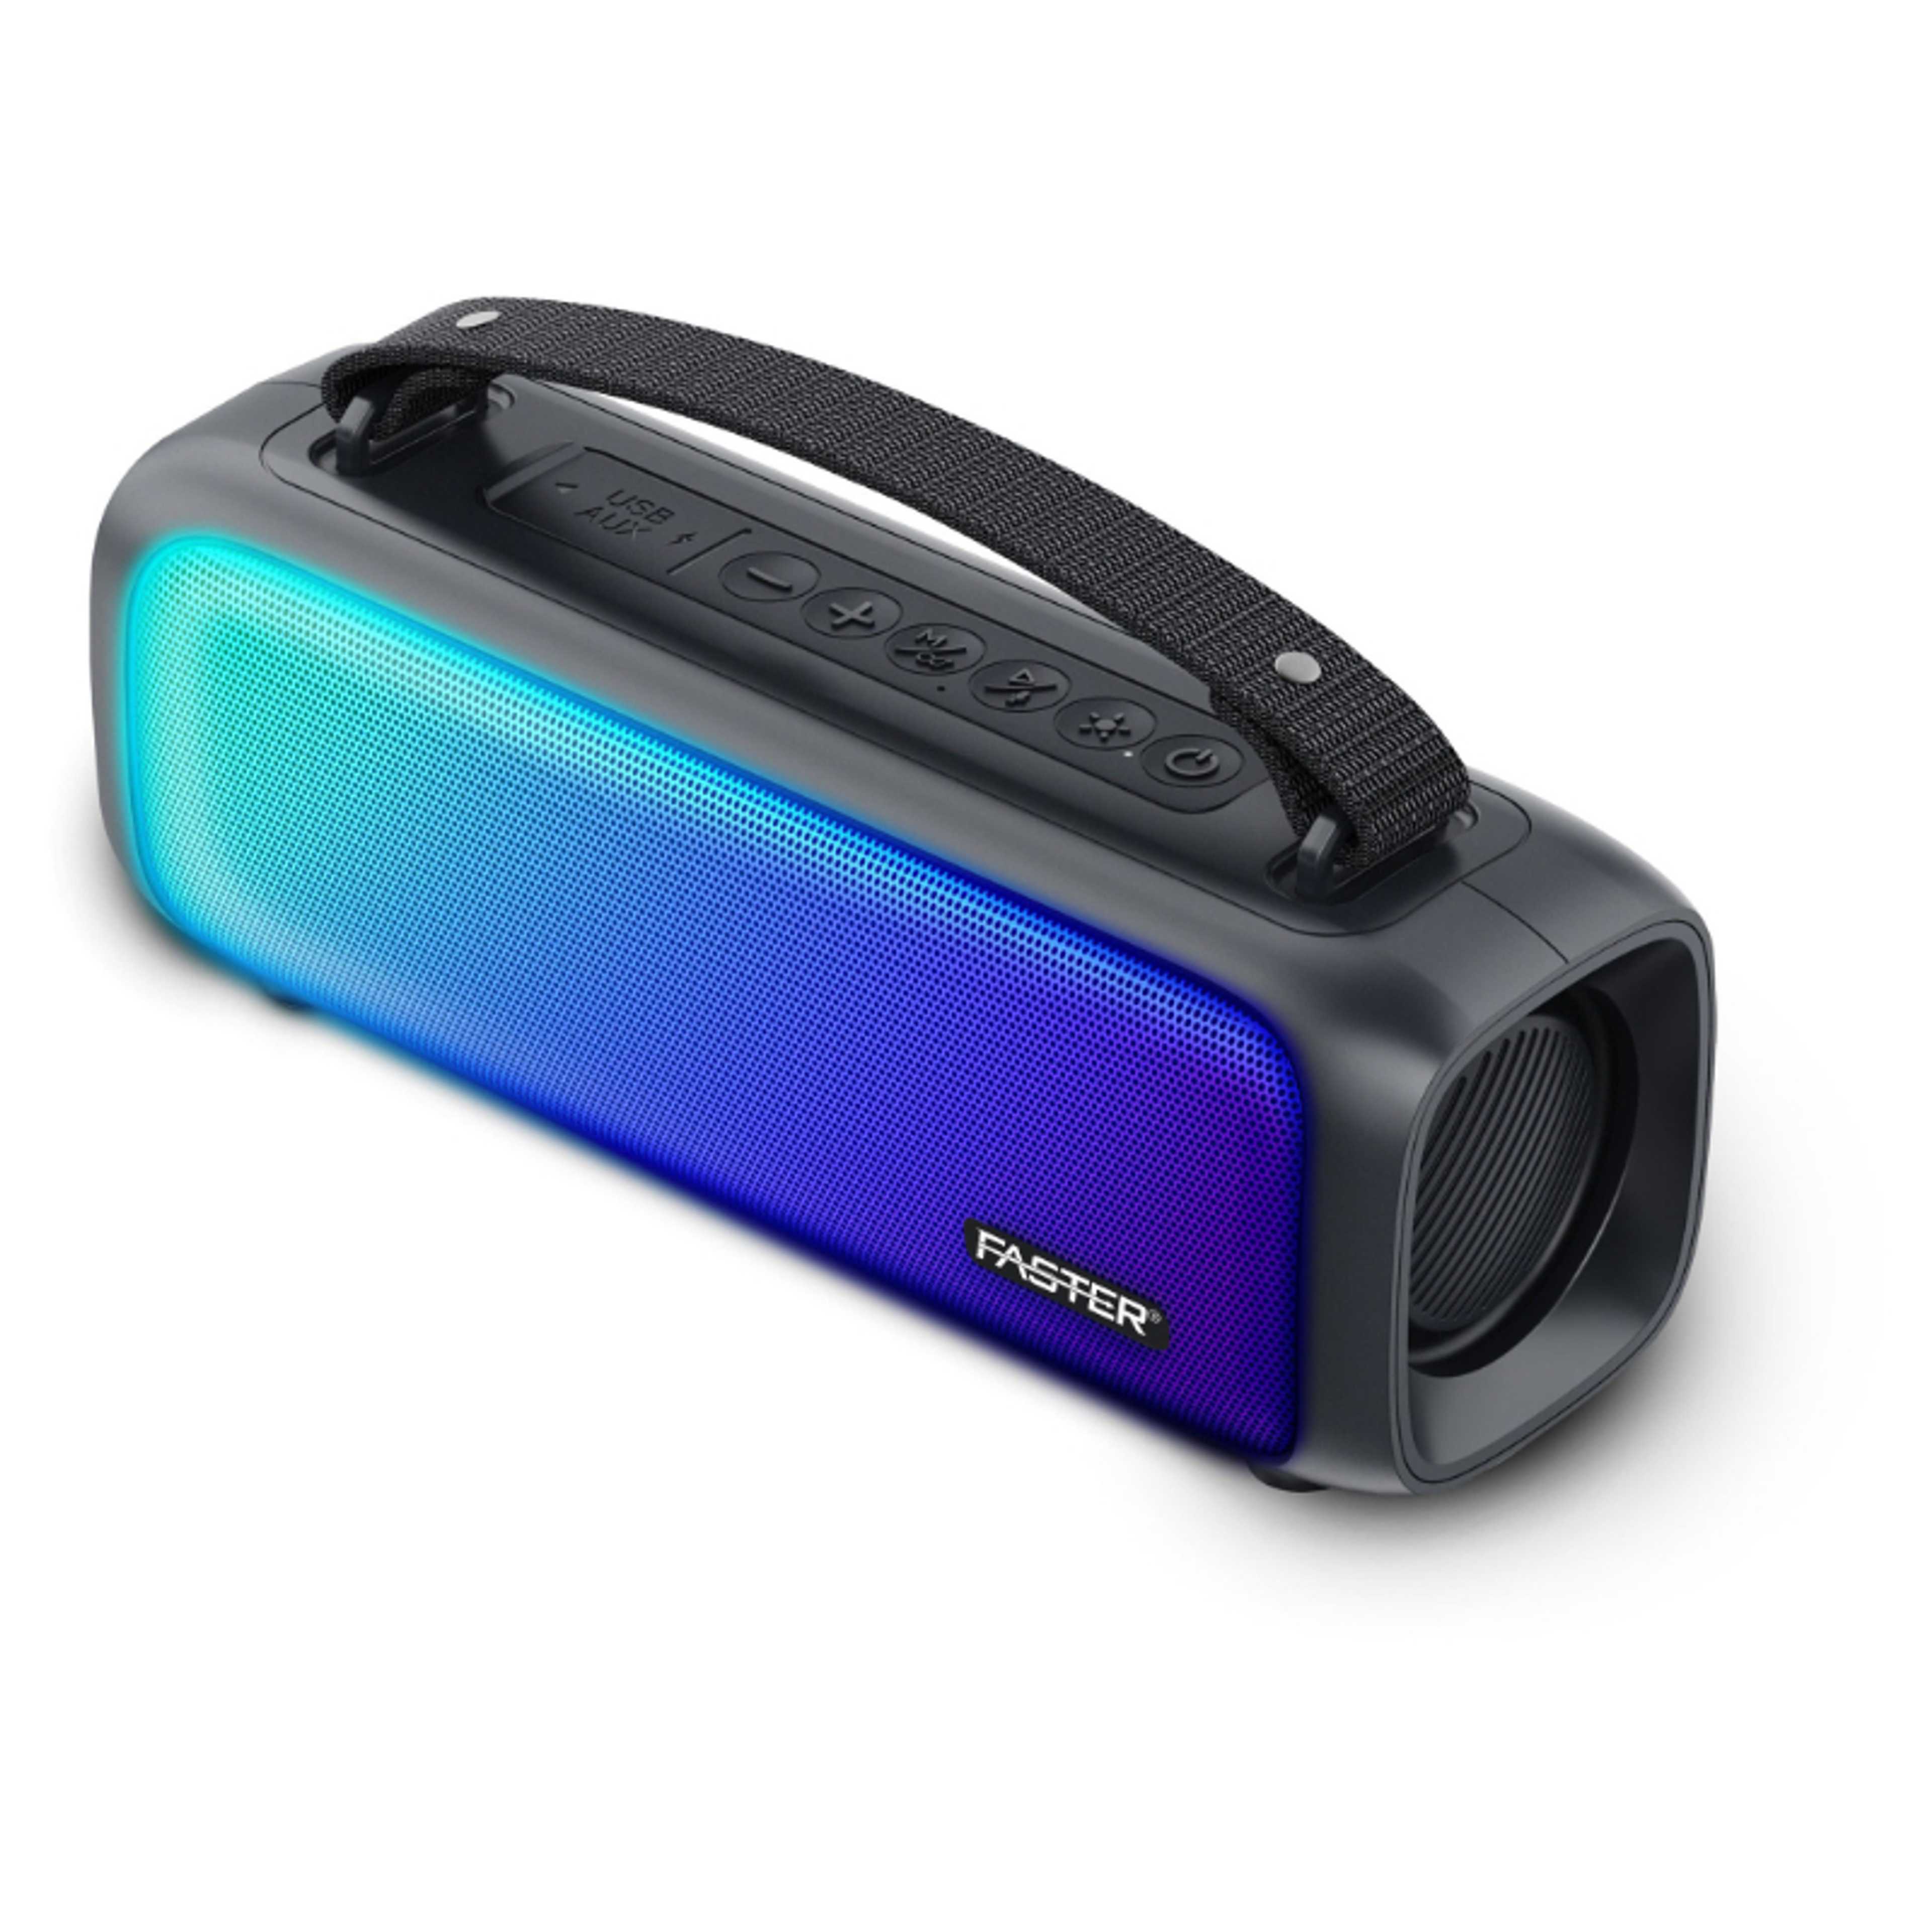 Faster Echo Go 3 Speaker - Stereo Sound HIgh Quality Speaker - Powerful Bass Sound With Subwoofer - Wireless Speaker with RGB Lights 7 hours Playtime - Bluetooth 5.1 Speaker for Outdoors, Camping, Suported FM,USB, AUX,& TWS